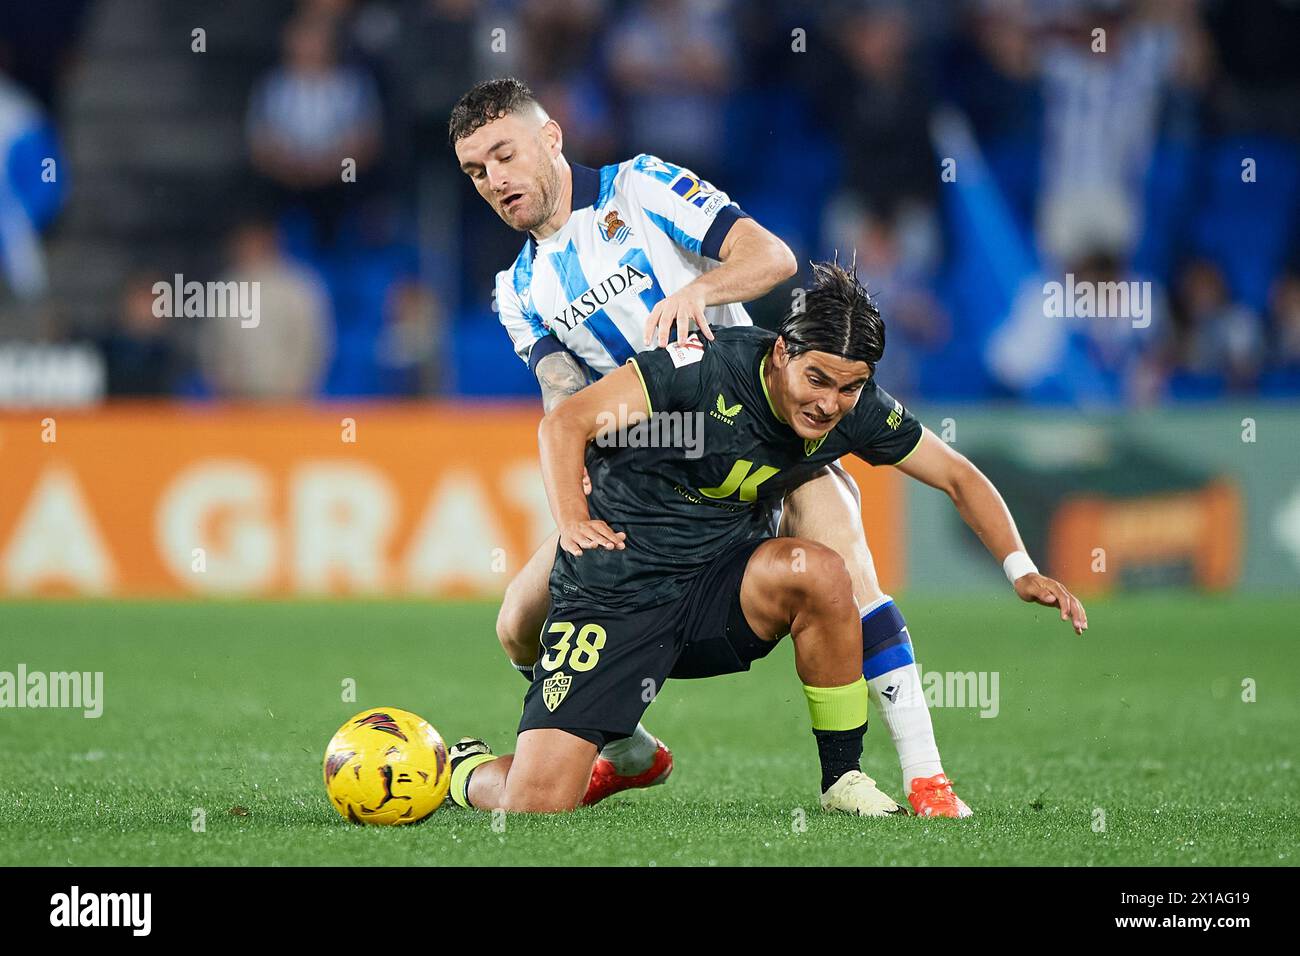 Javi Galan of Real Sociedad compete for the ball with Luka Romero of UD Almeria during the LaLiga EA Sports match between Real Sociedad and UD Almeria Stock Photo